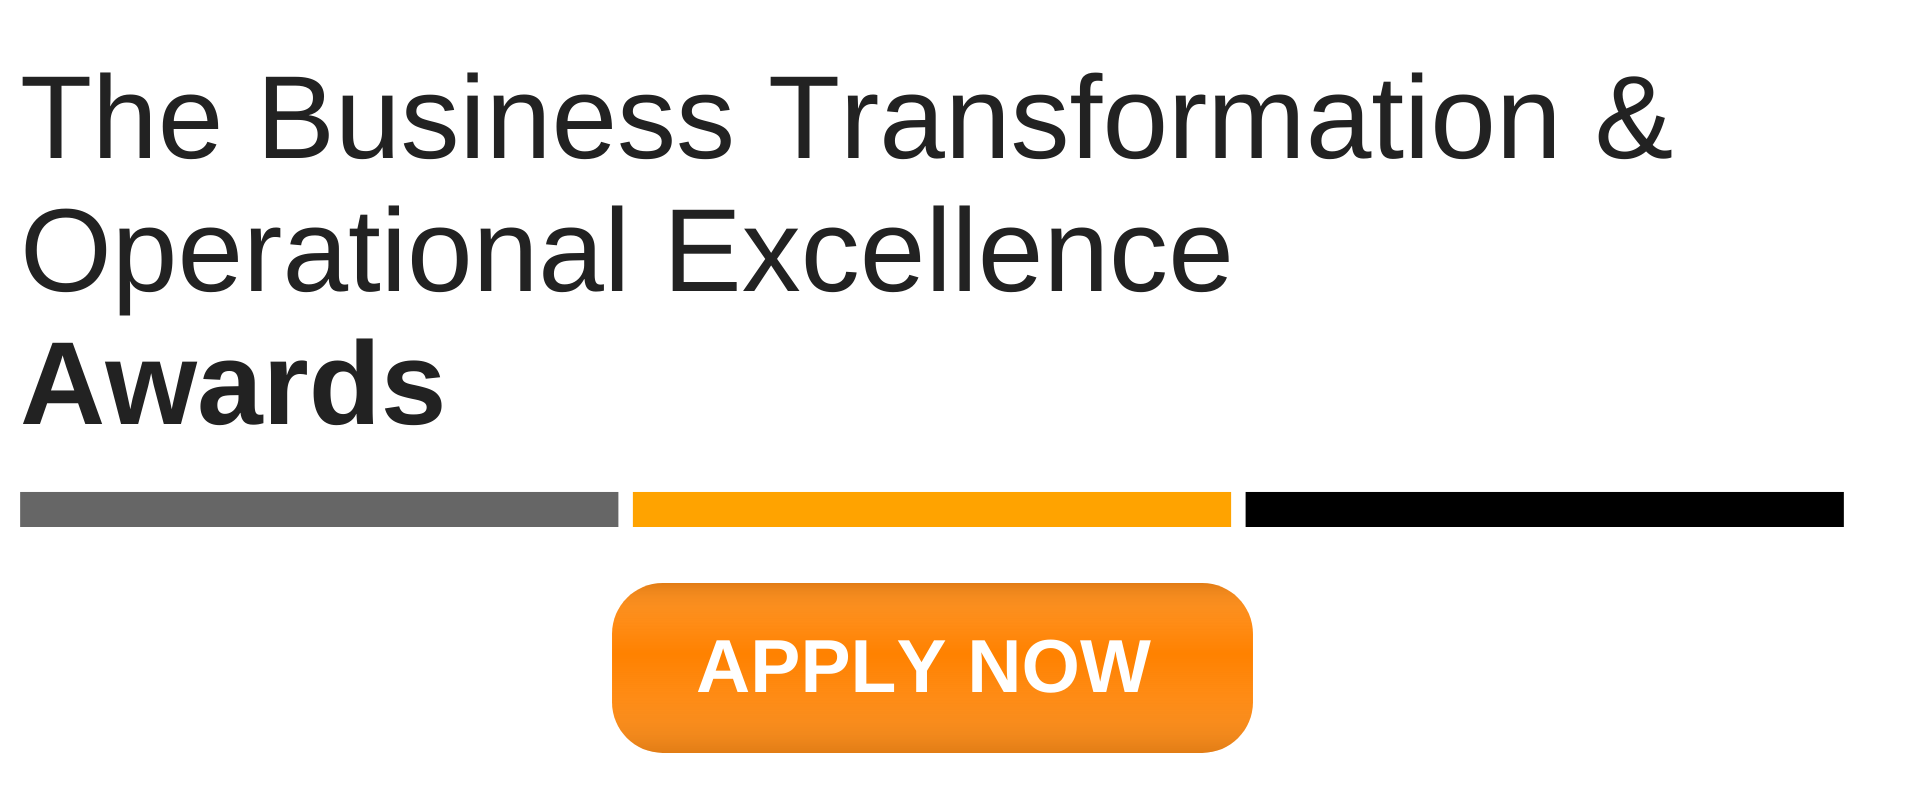 The Business Transformation & Operational Excellence Industry Awards